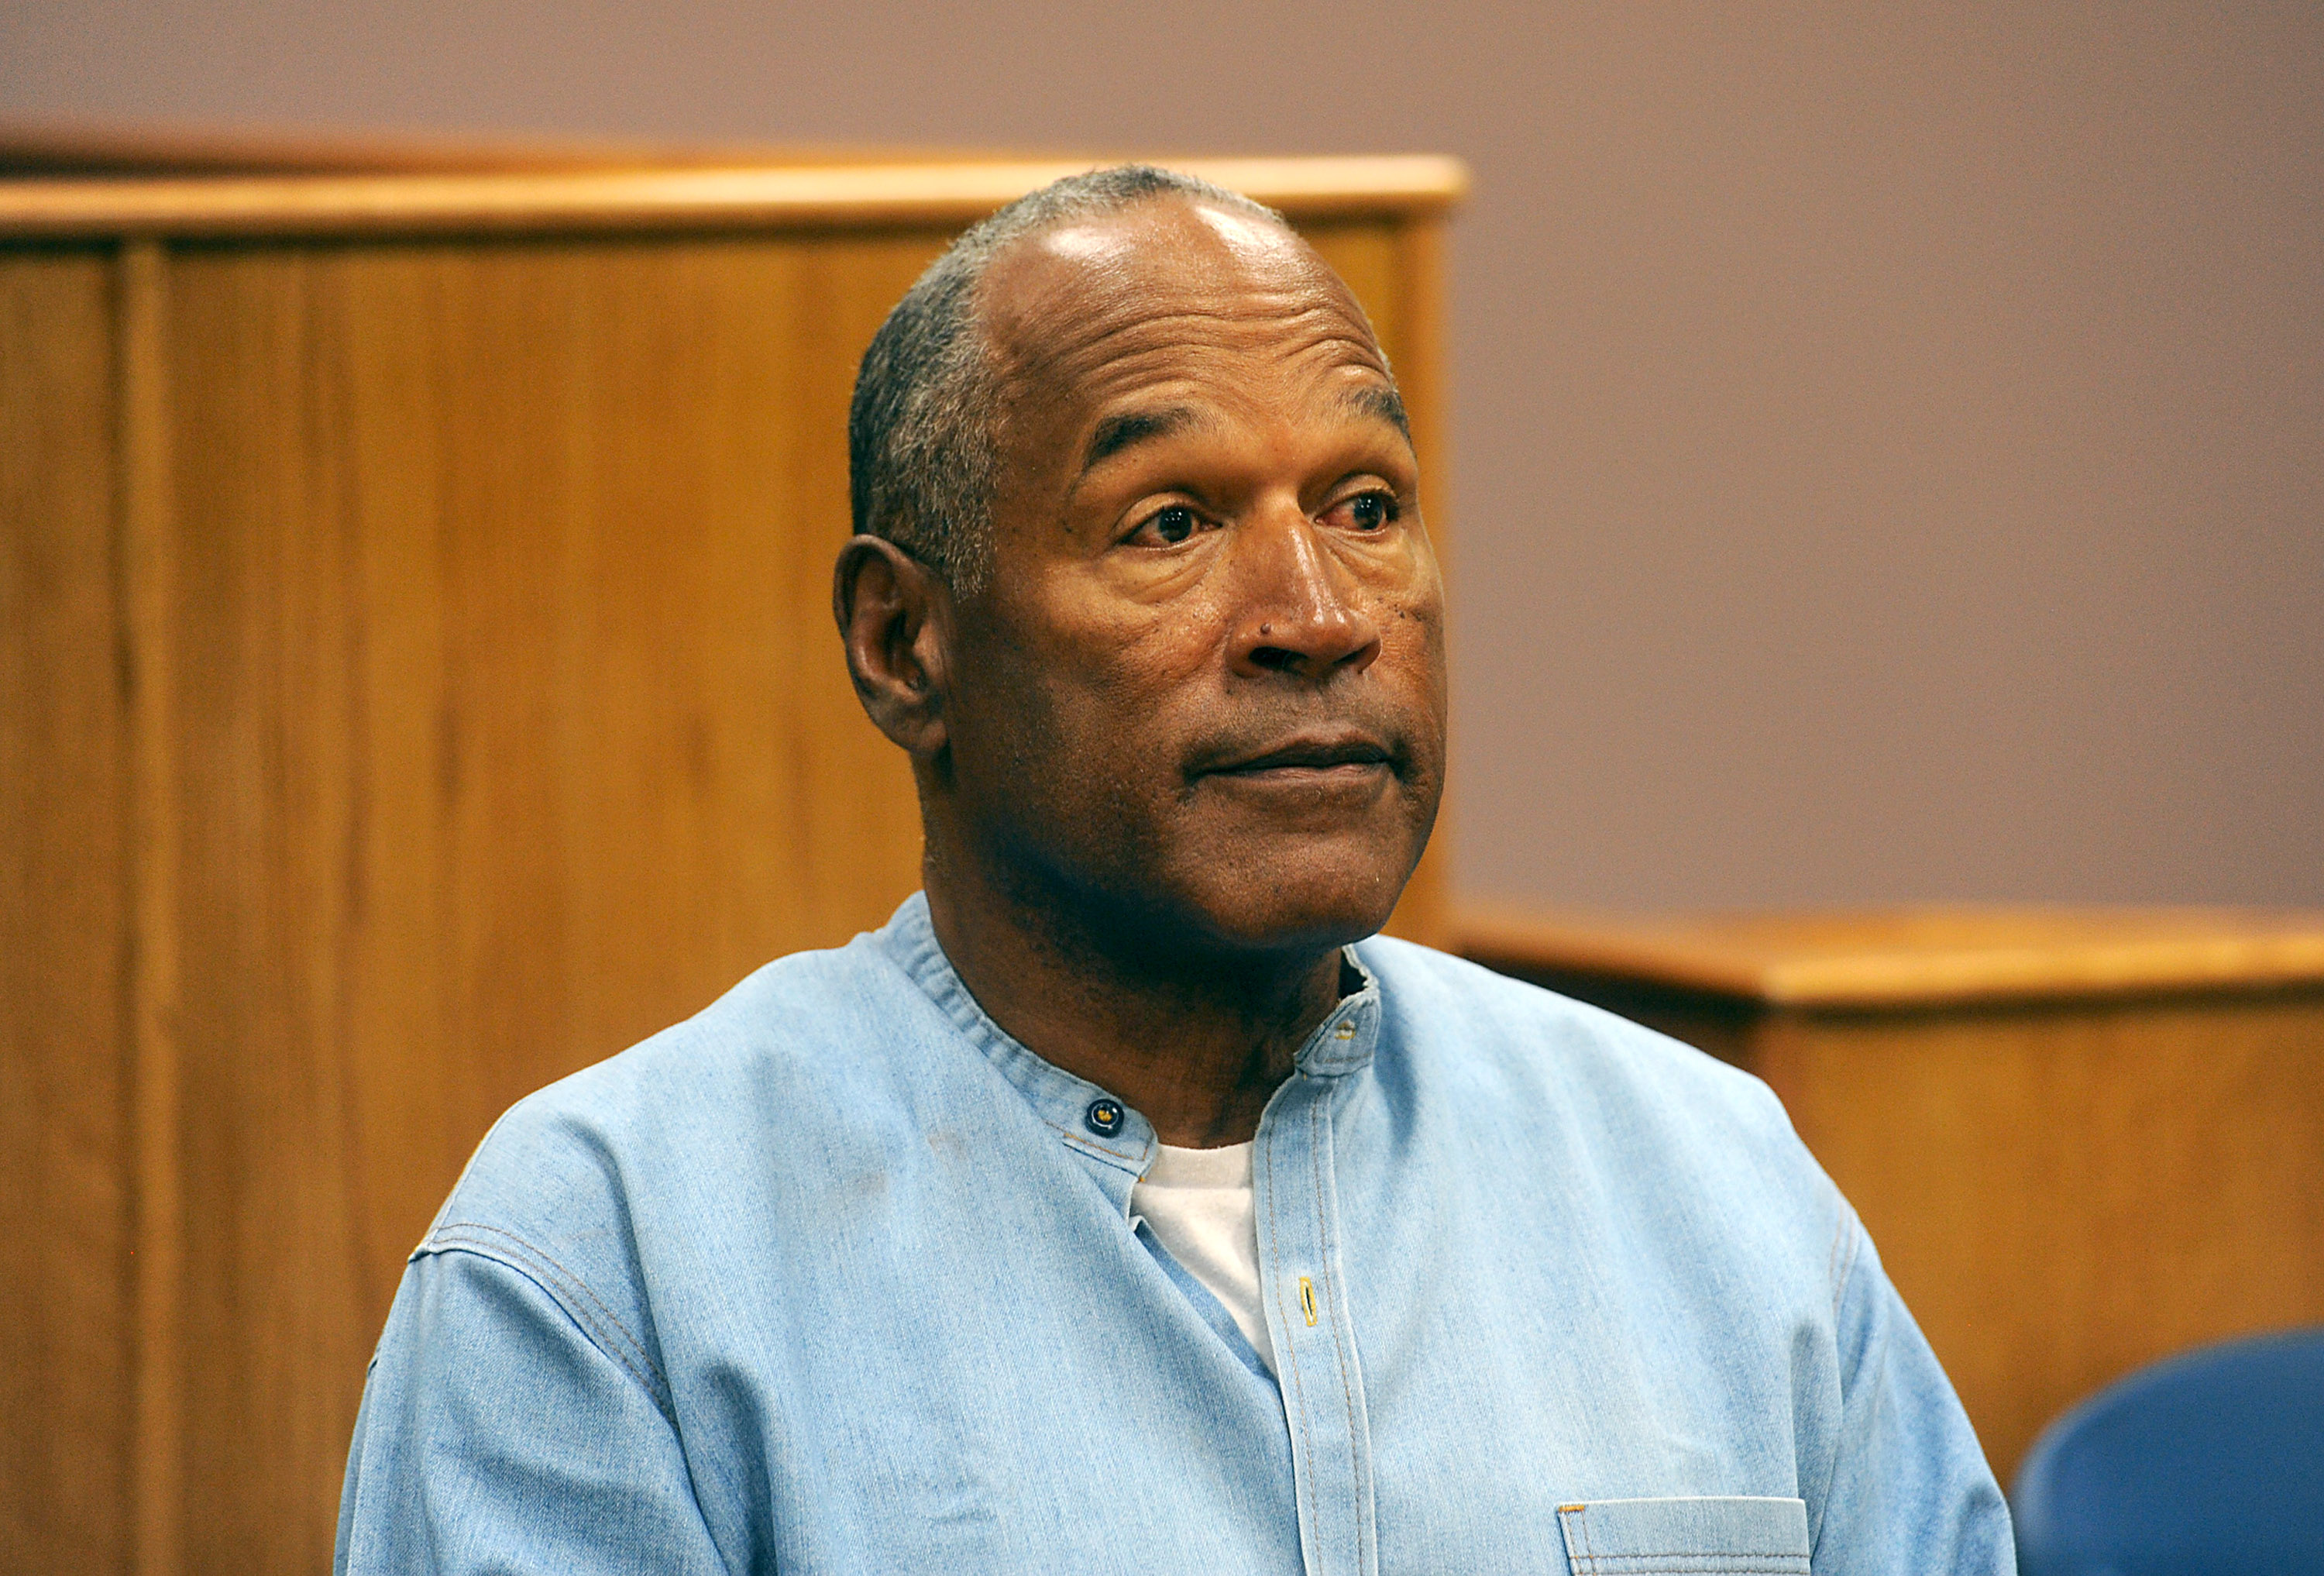 O.J. Simpson will be cremated; estate executor says ‘hard no' to
controversial ex-athlete's brain being studied for CTE